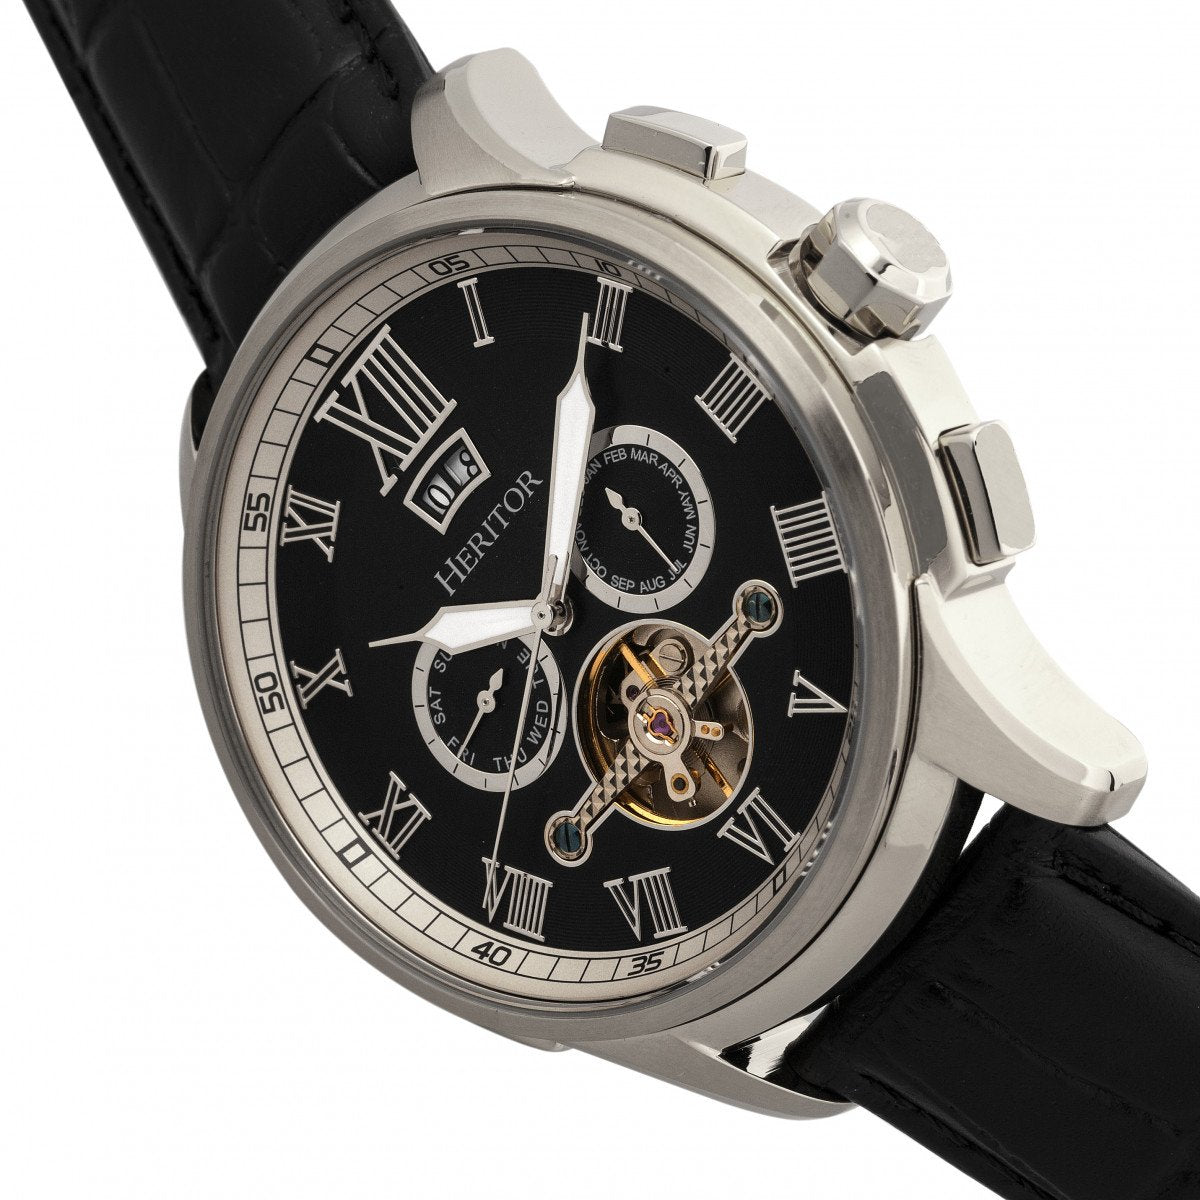 Heritor Automatic Hudson Semi-Skeleton Leather-Band Watch w/Day/Date - Black/Silver - HERHR7502